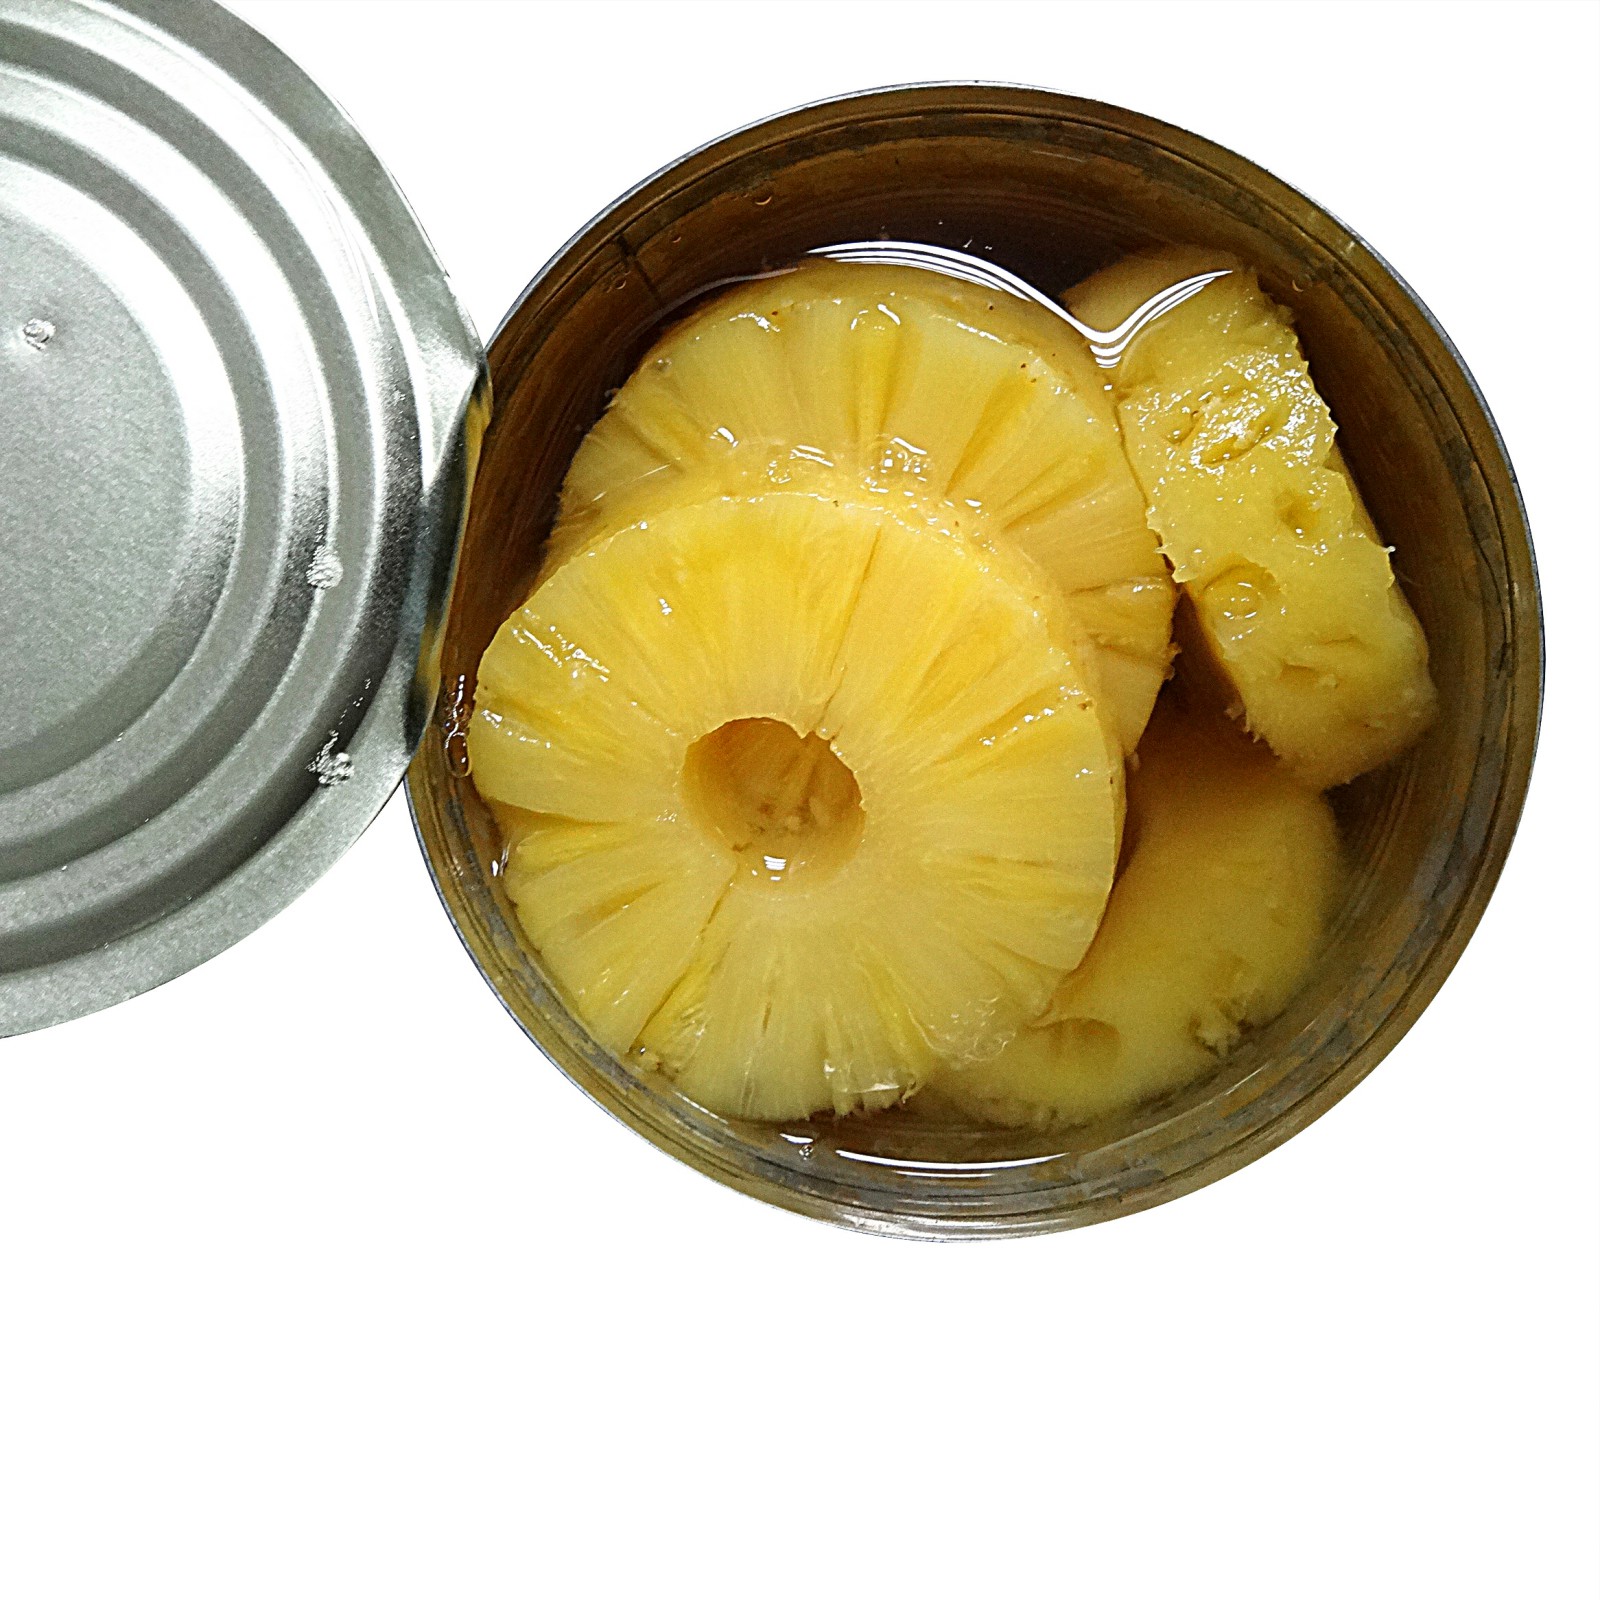 Canned pineapple slice